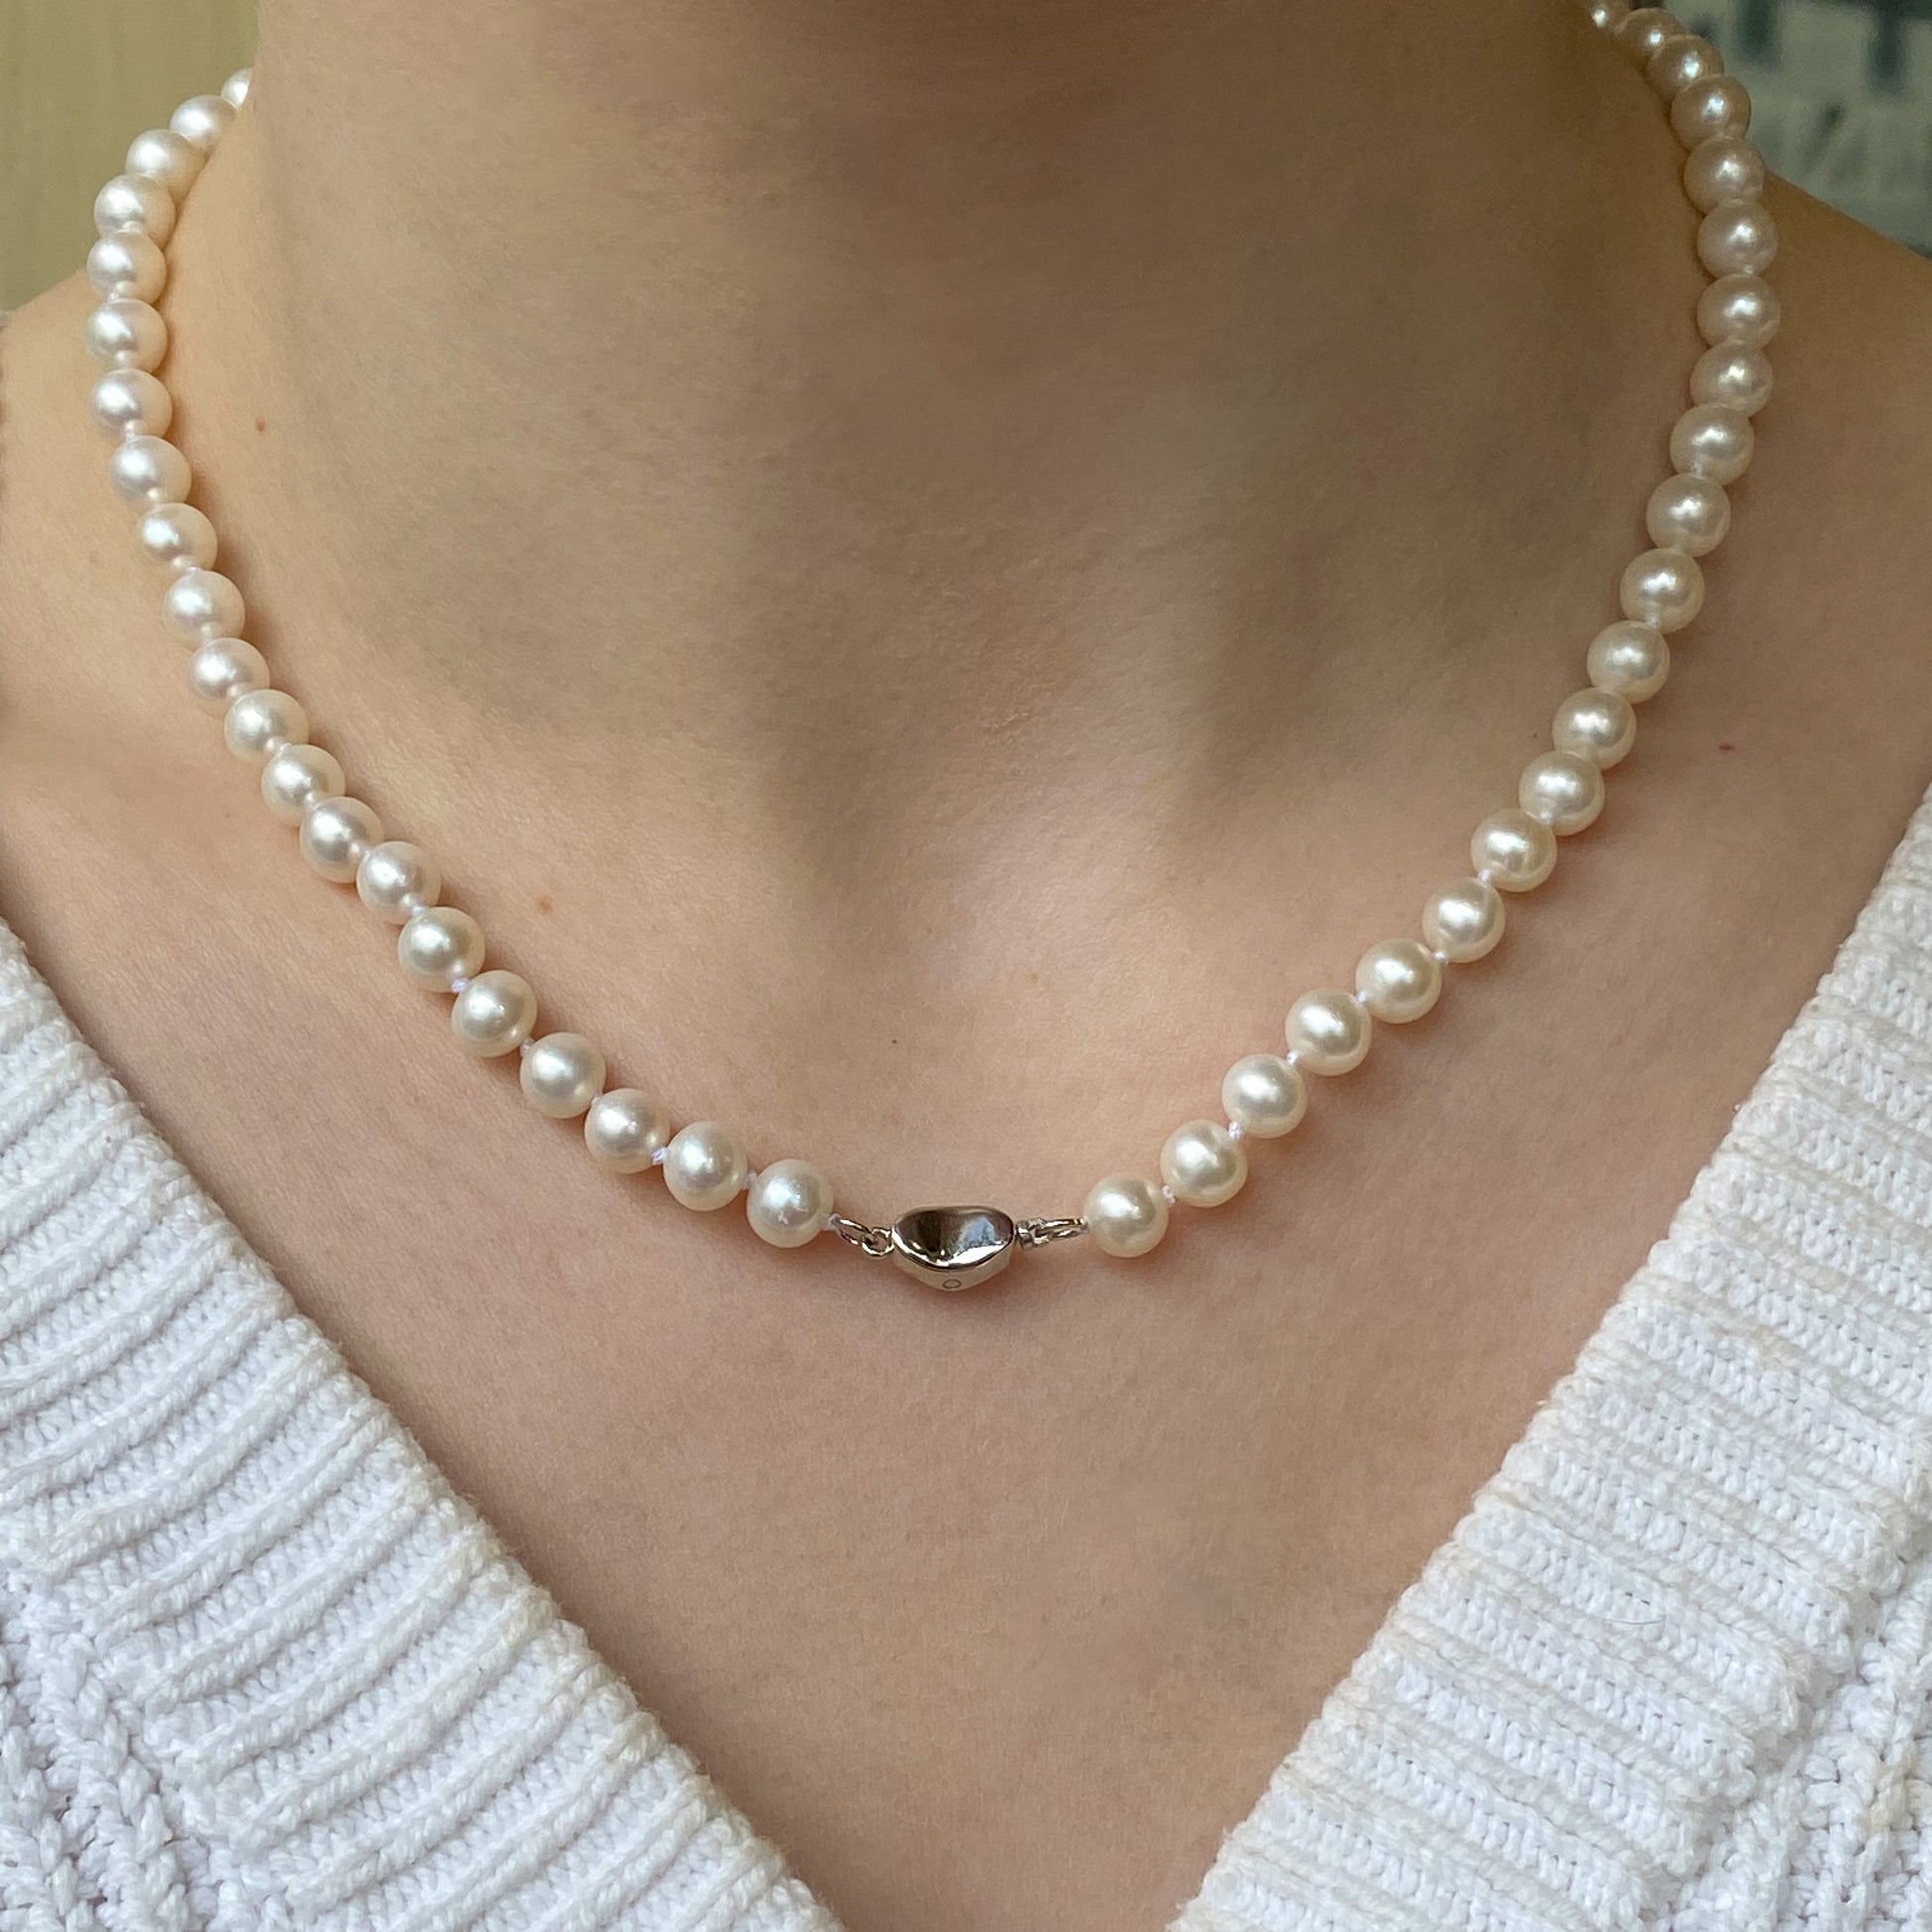 Silver Cultured Freshwater Pearl Necklace | 45cm - John Ross Jewellers